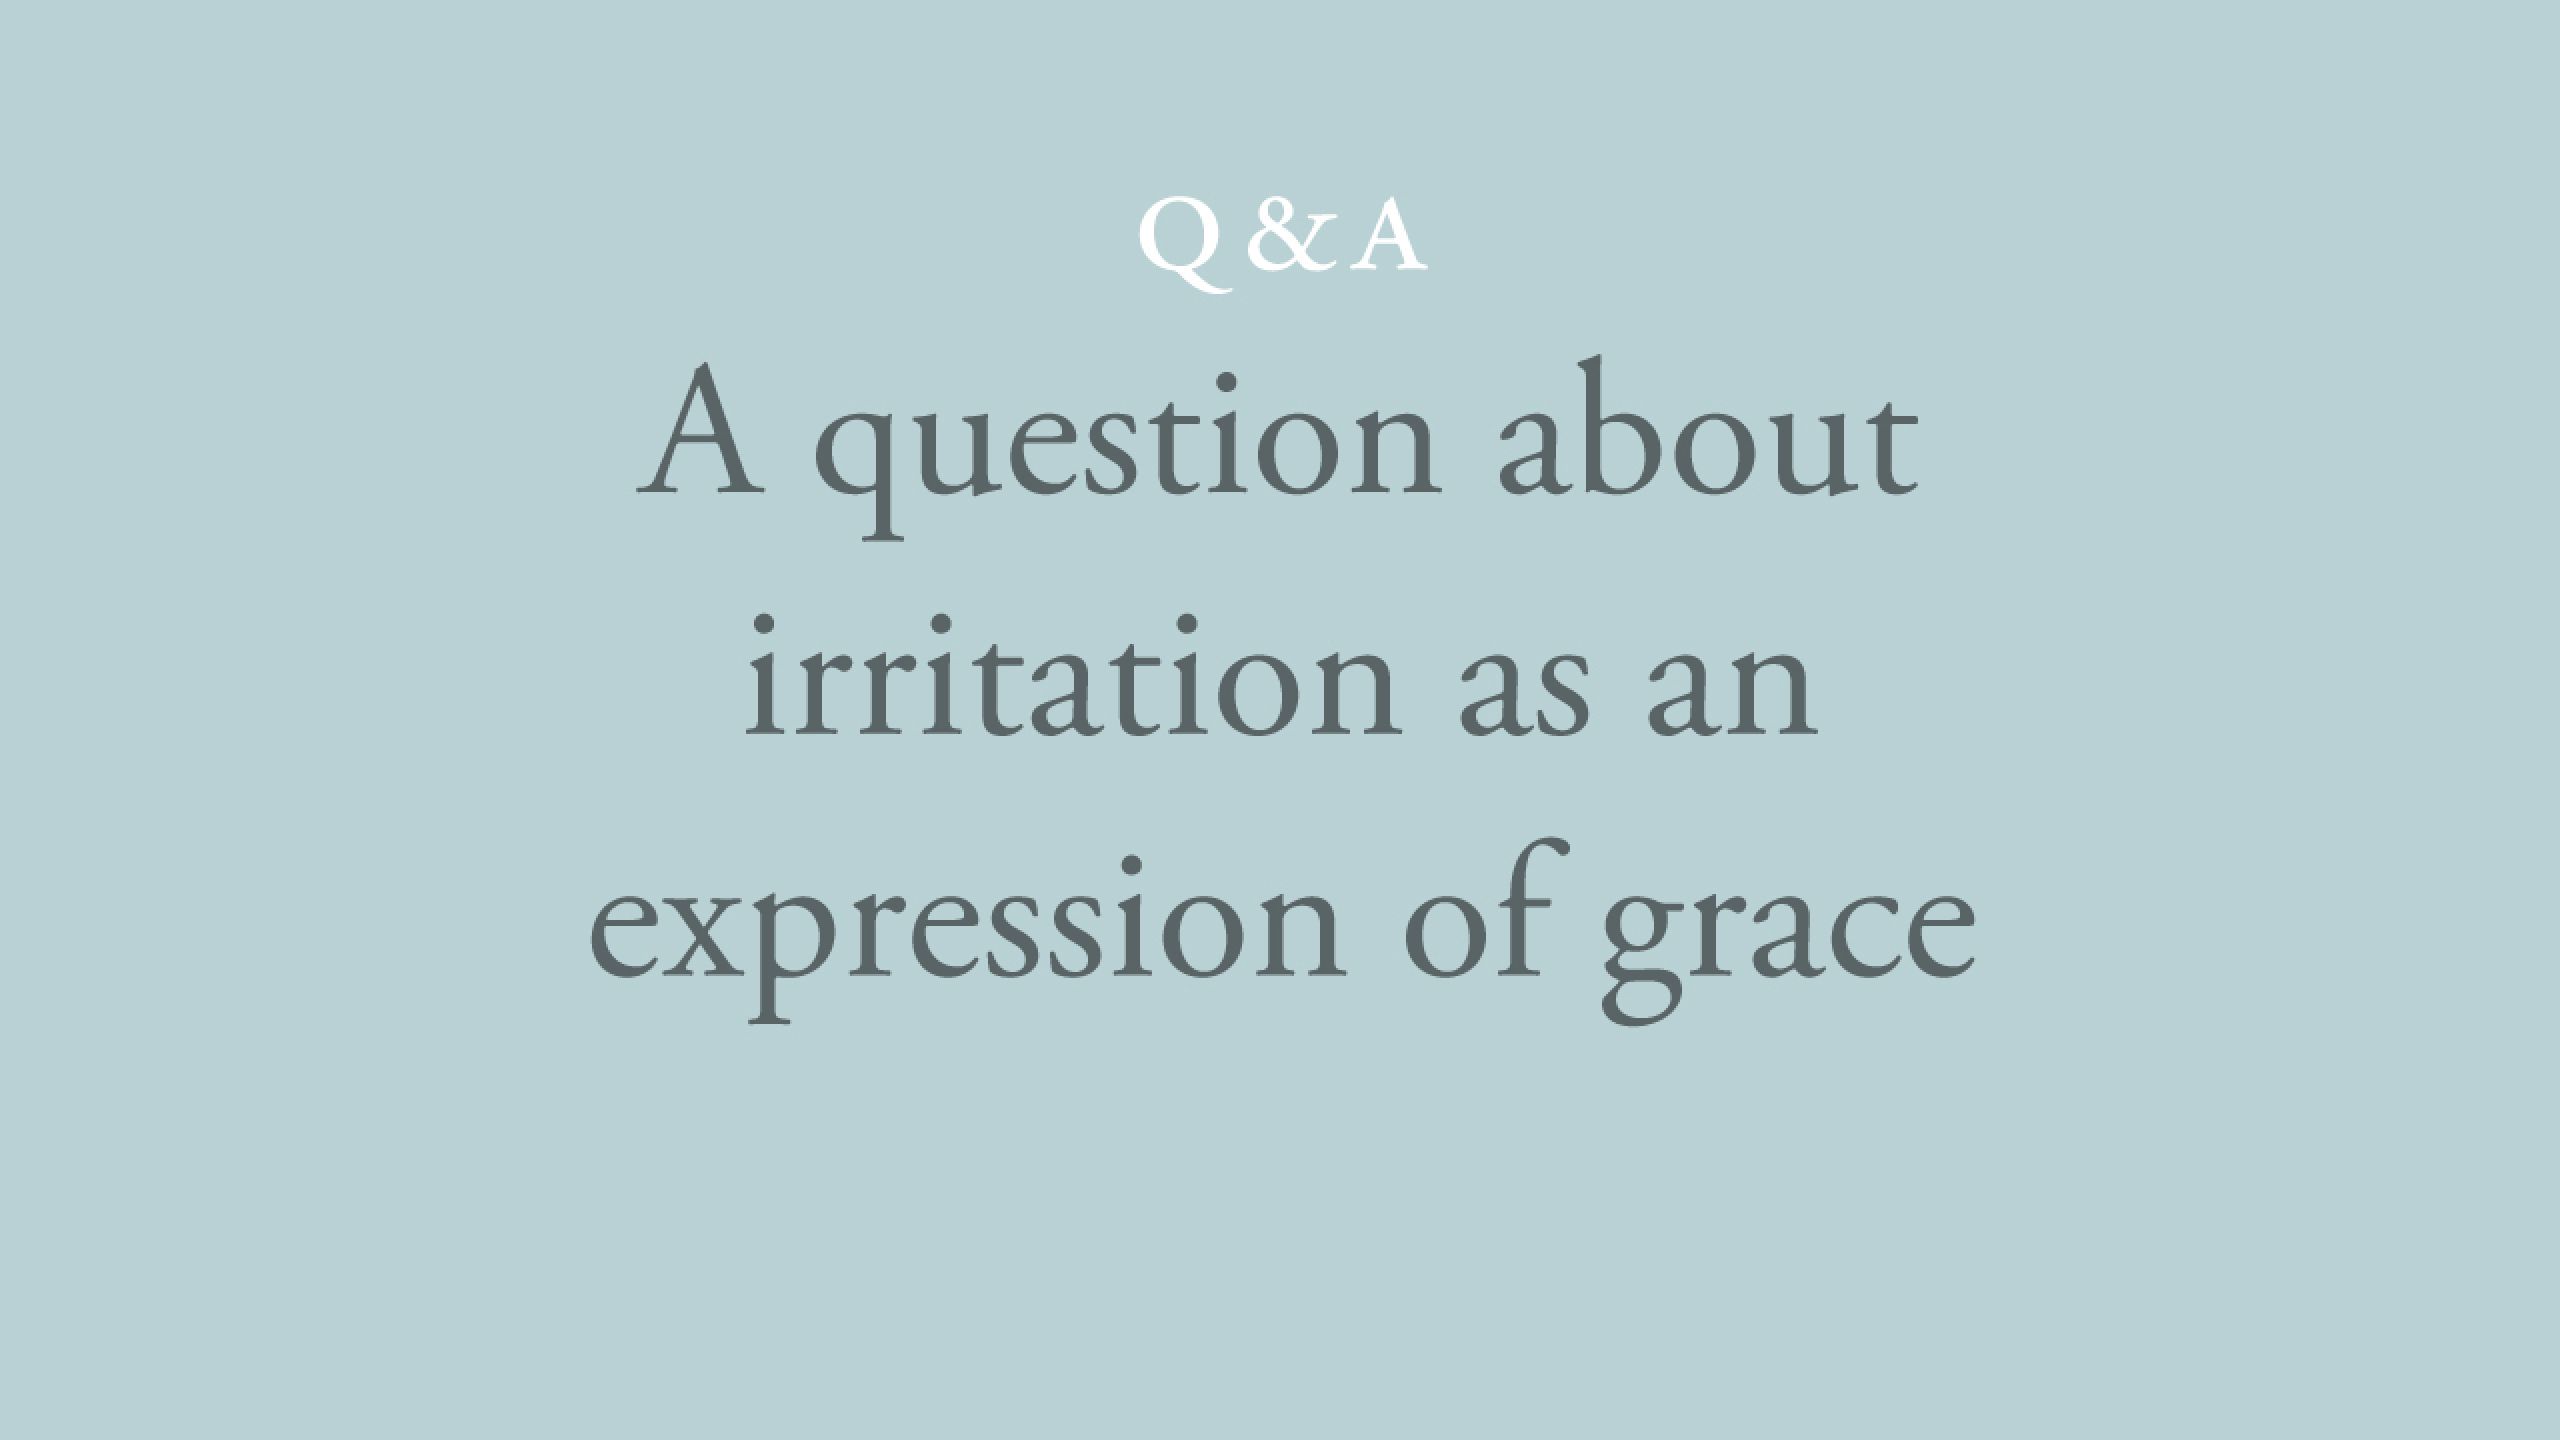 Is irritation an expression of grace?